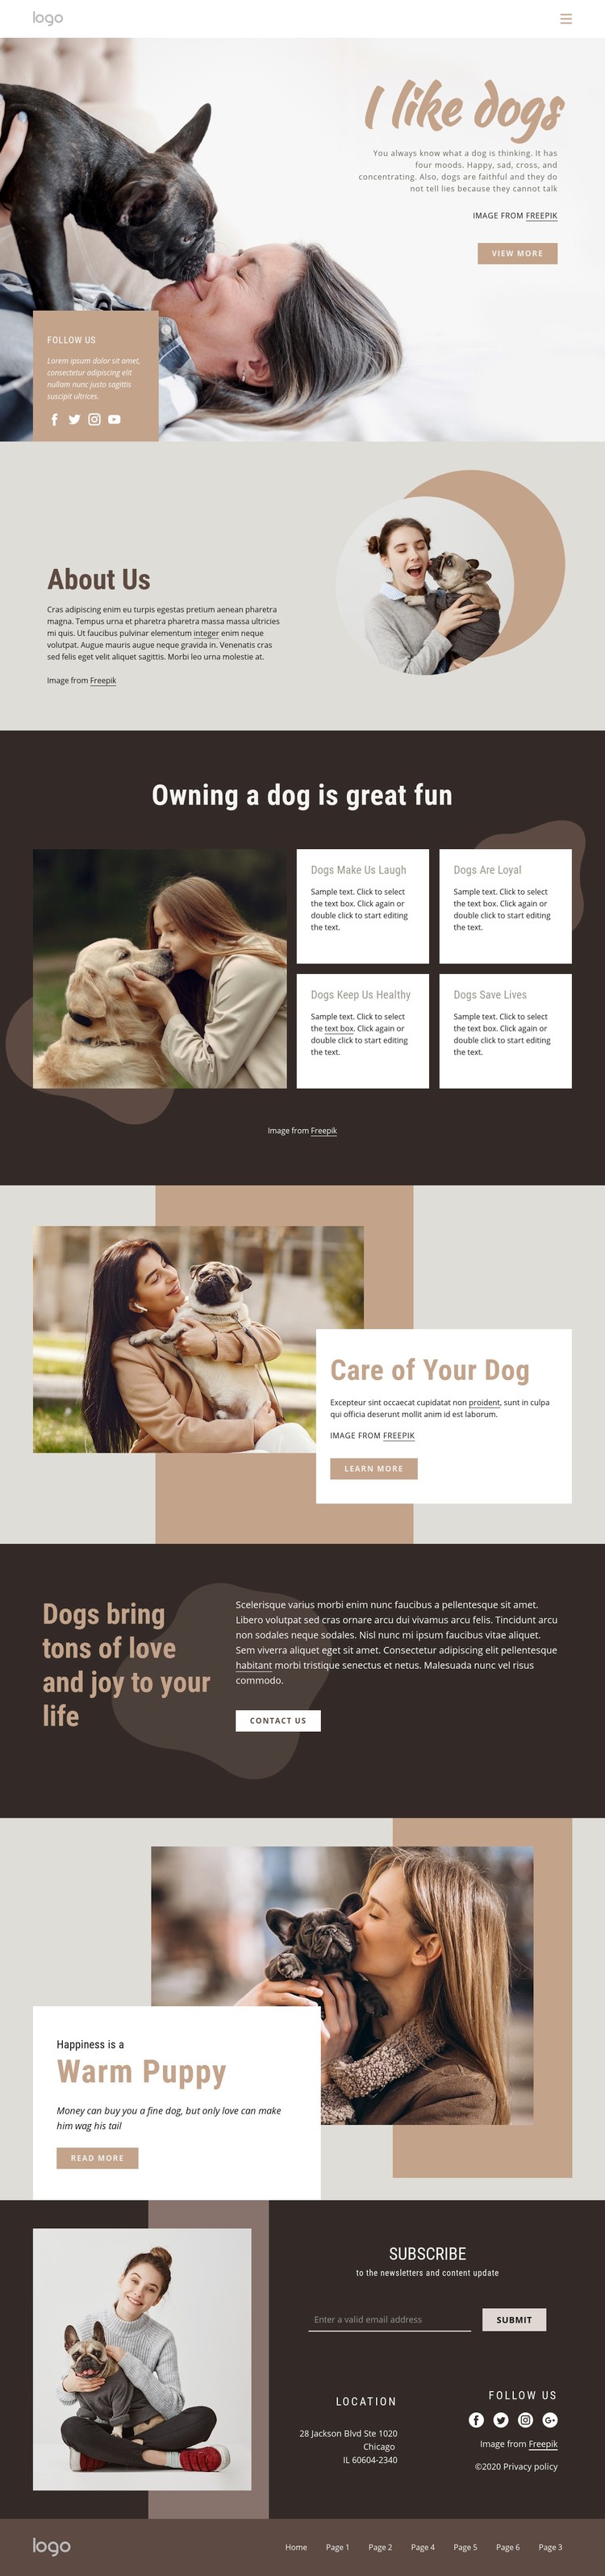 All about dogs Webflow Template Alternative